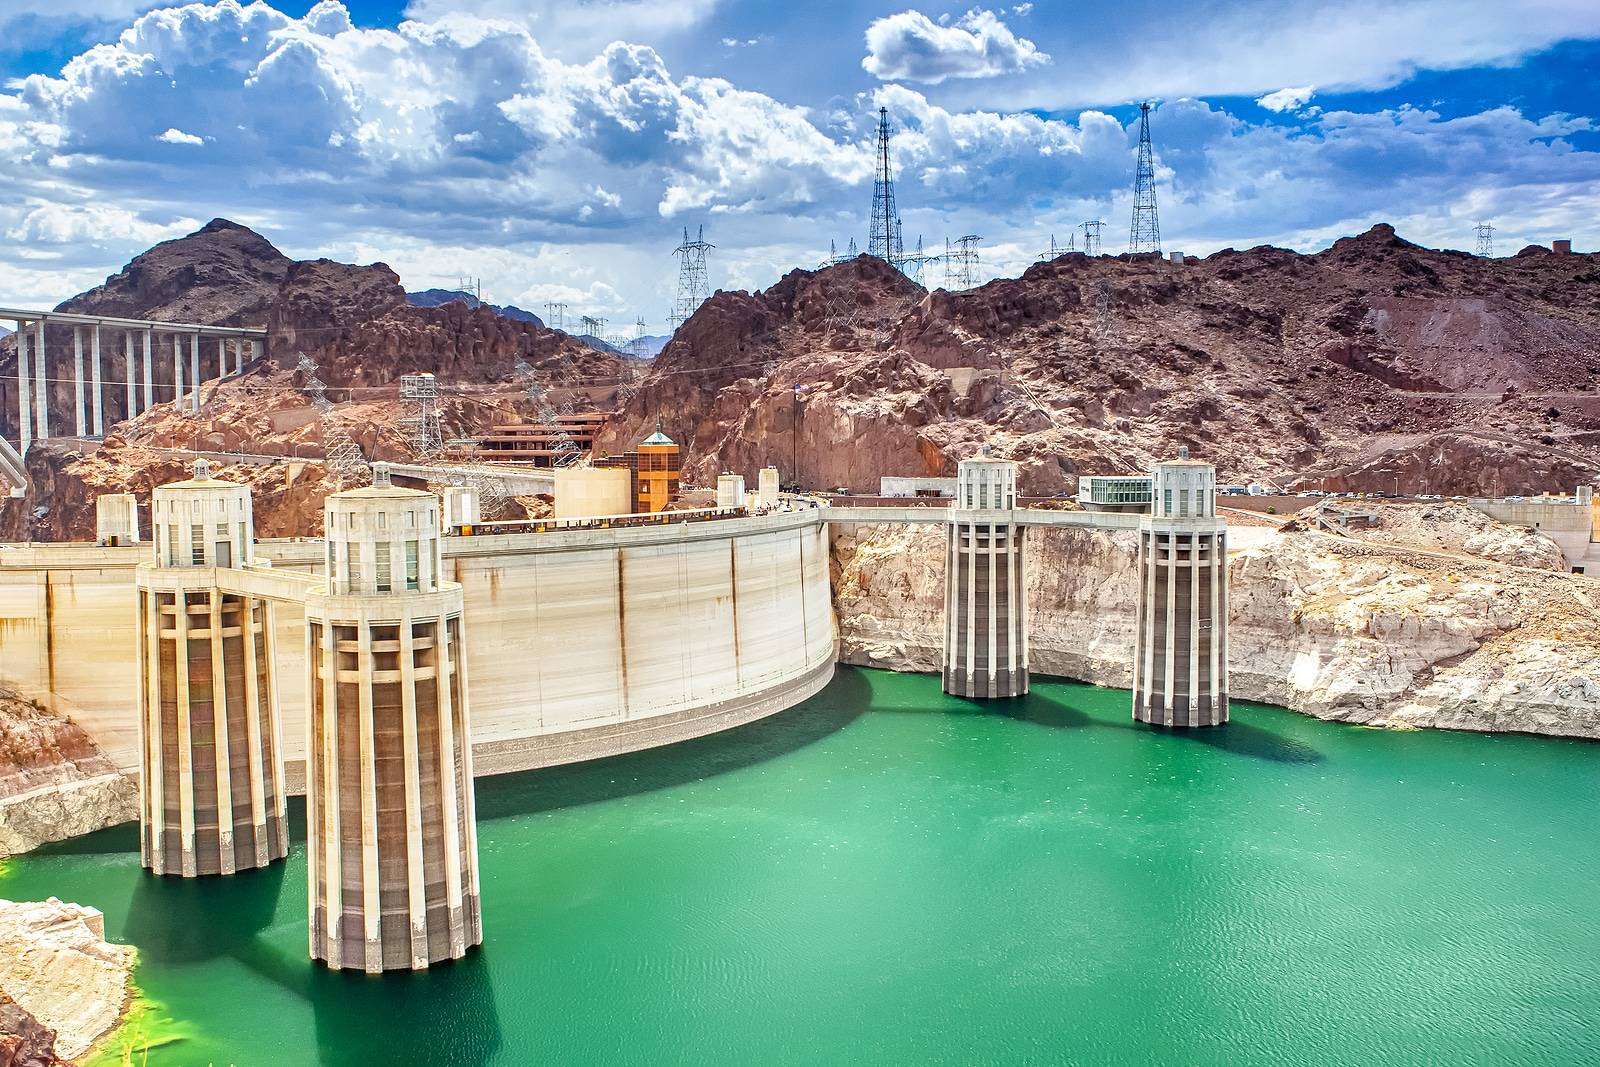 The Alarming Drying Up of Lake Mead